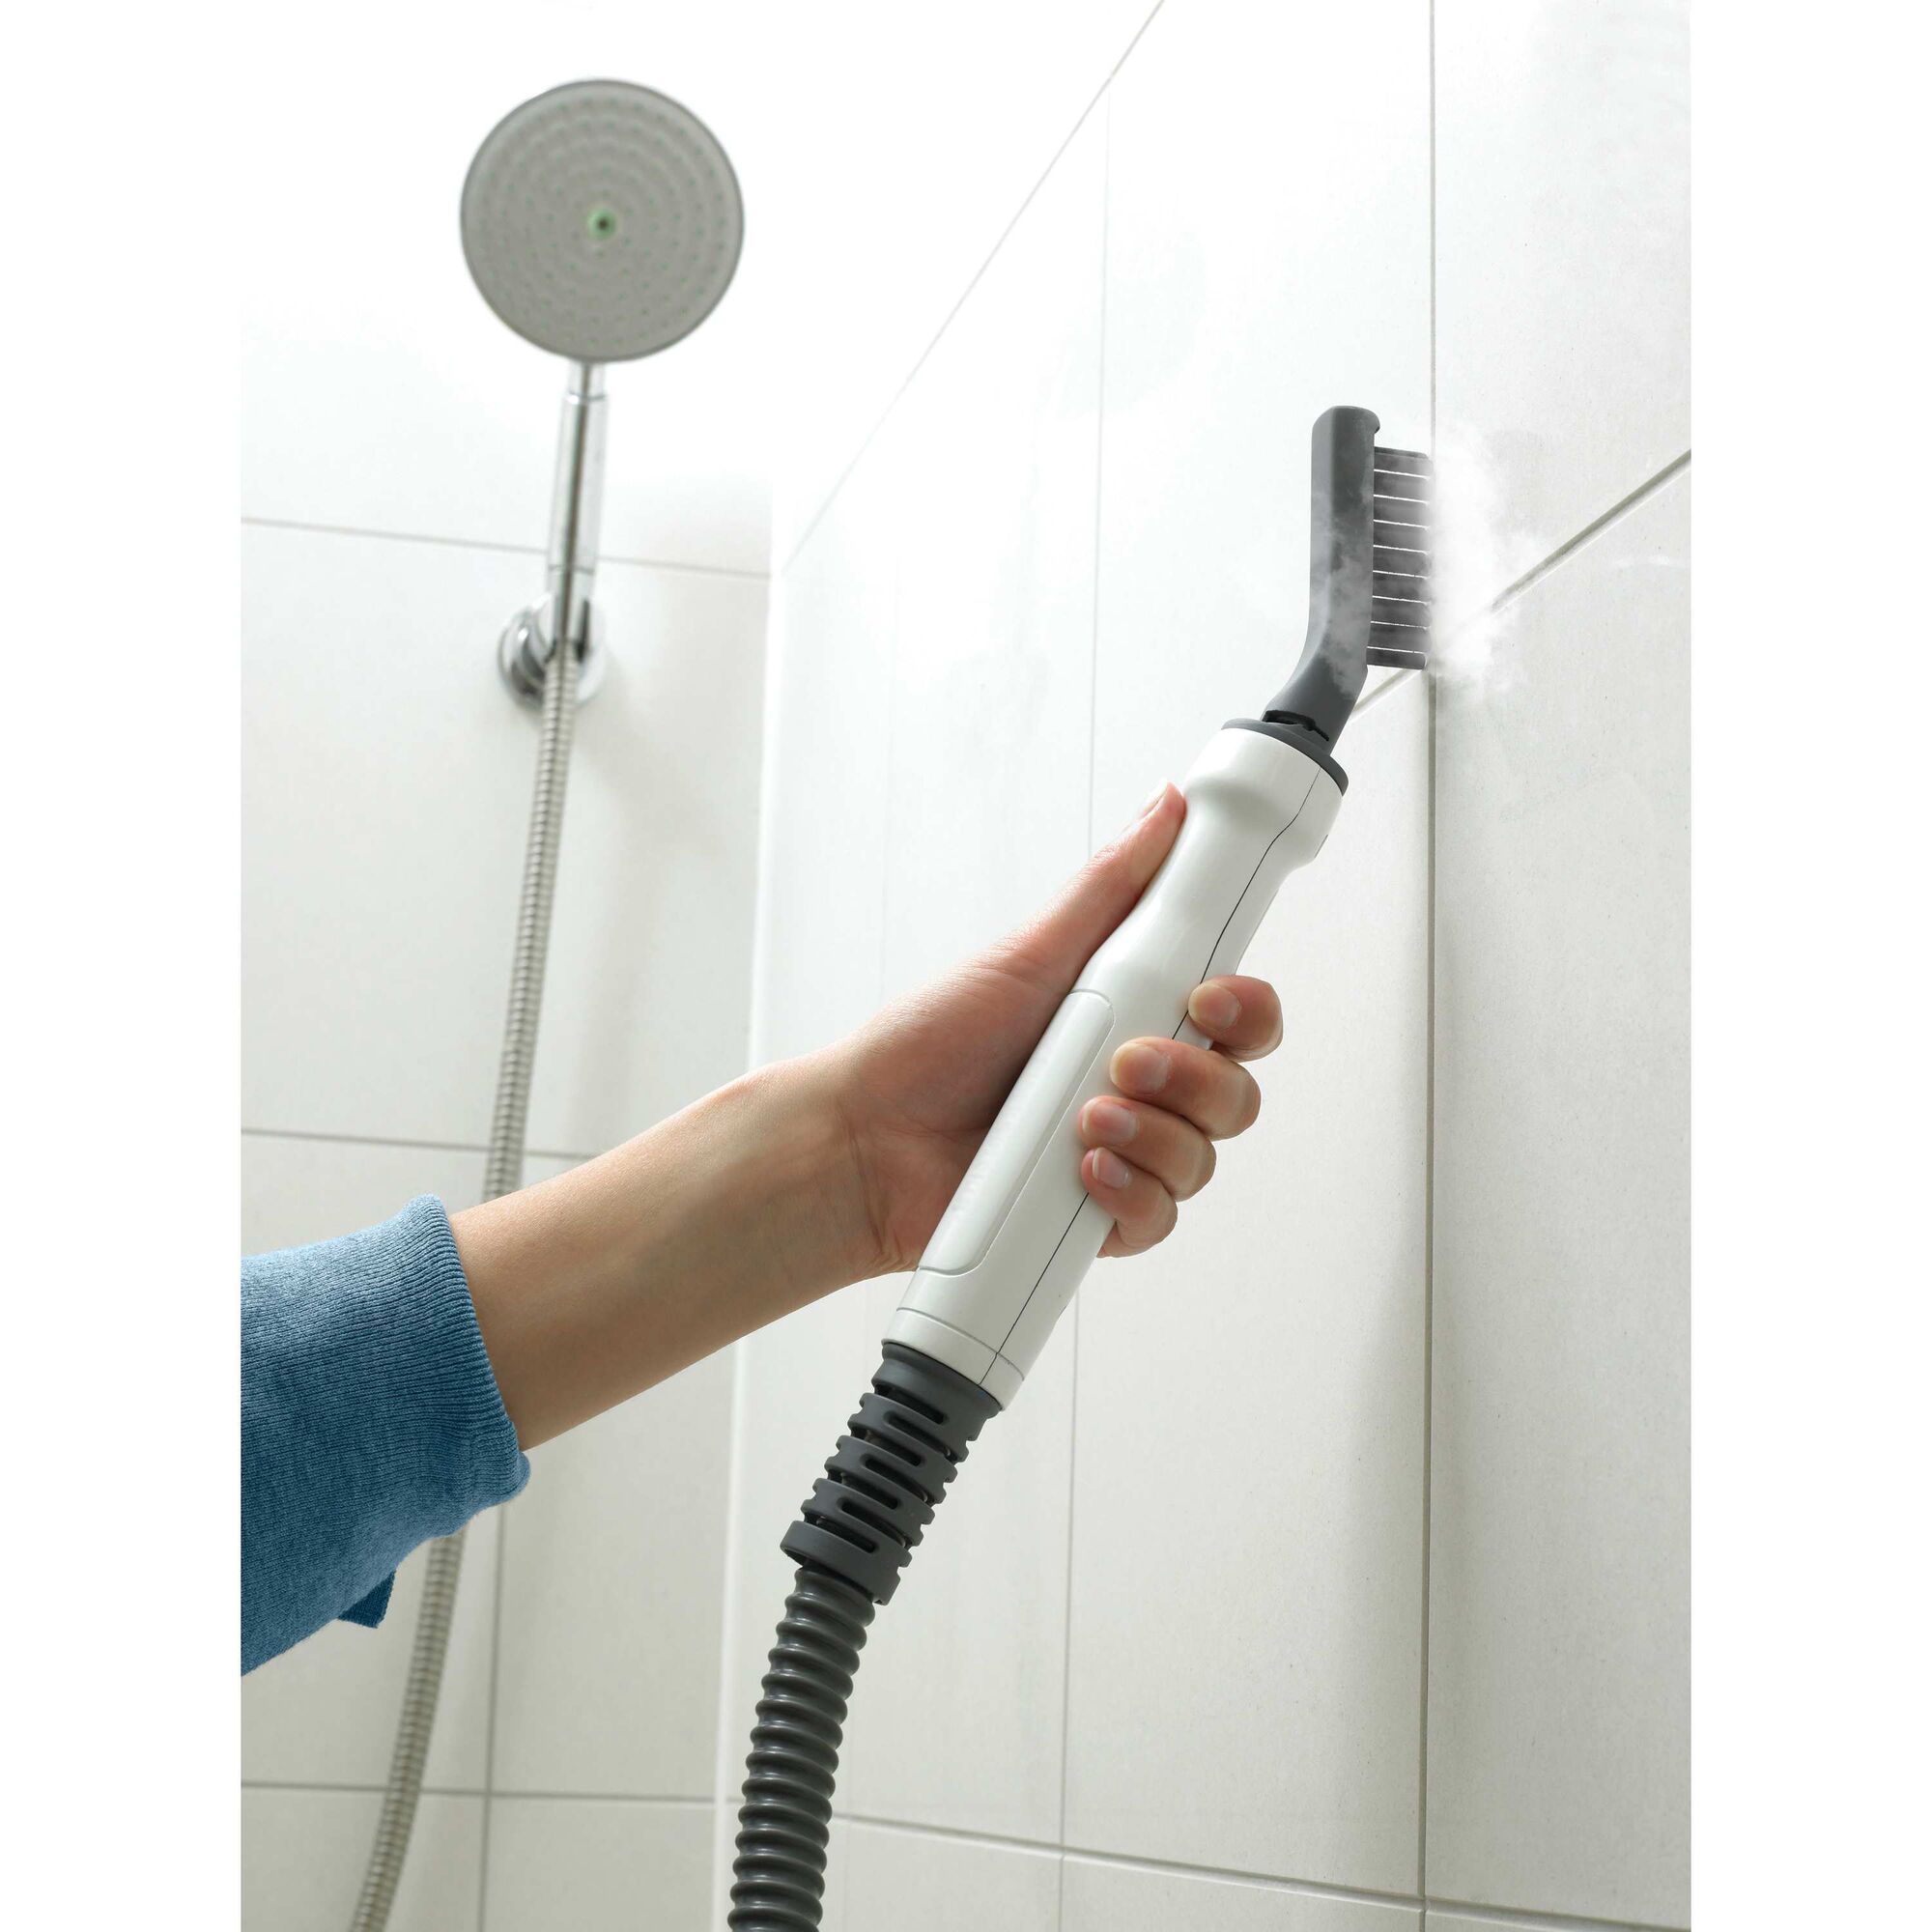 8 in 1 complete steam cleaning system being used by a person to clean bathroom tiles.